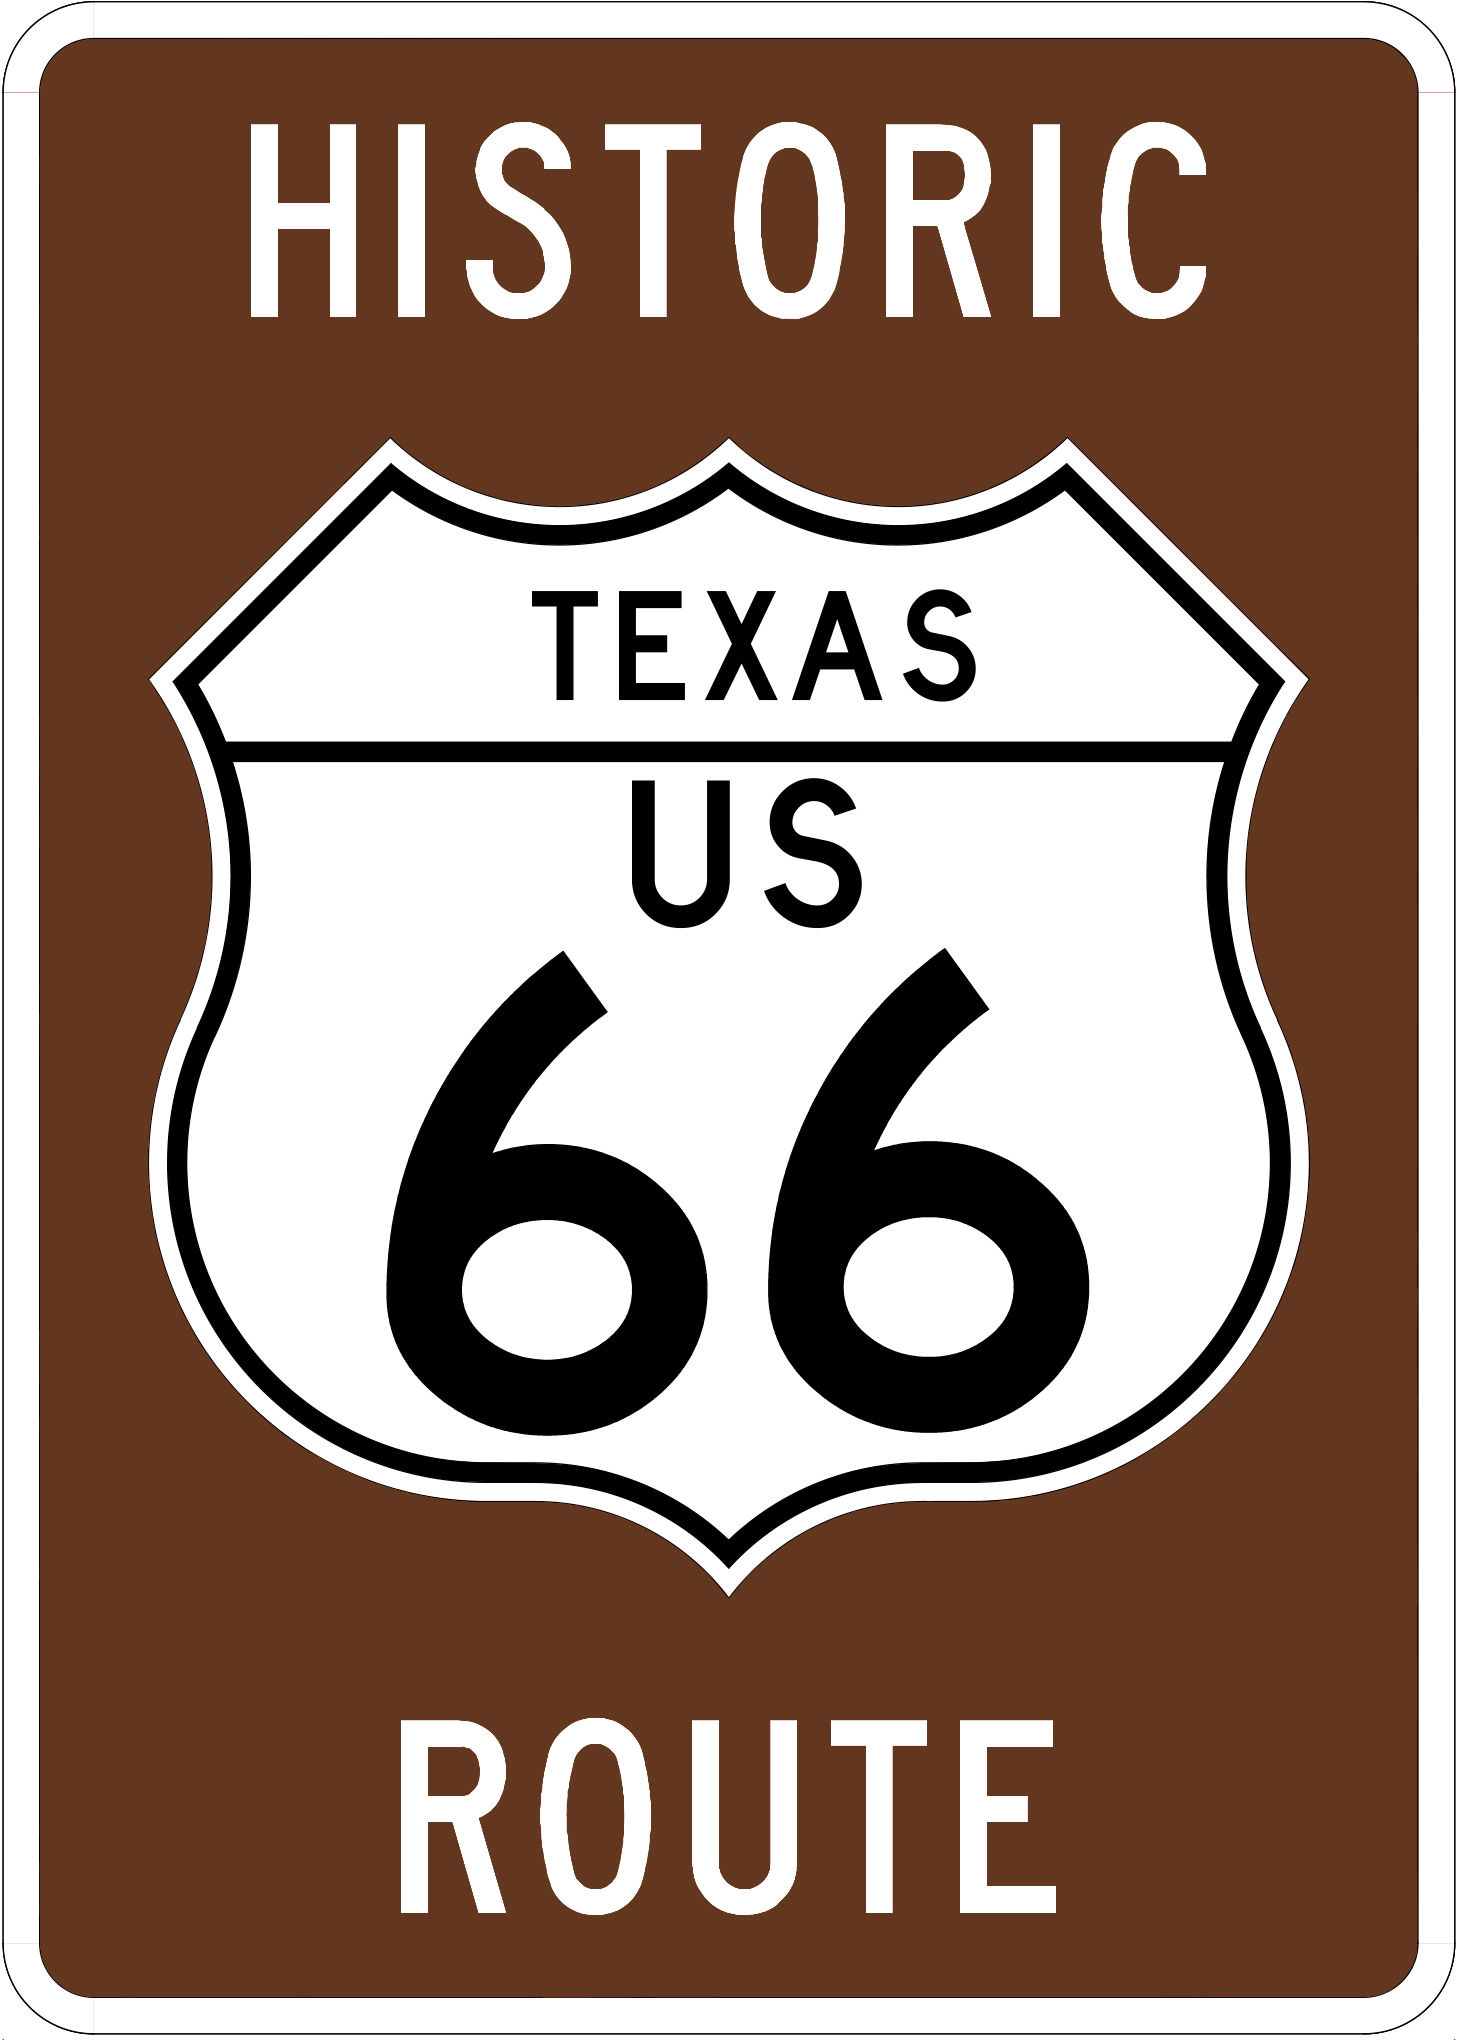 Highway Sign Templates THC.Texas.gov Texas Historical Commission